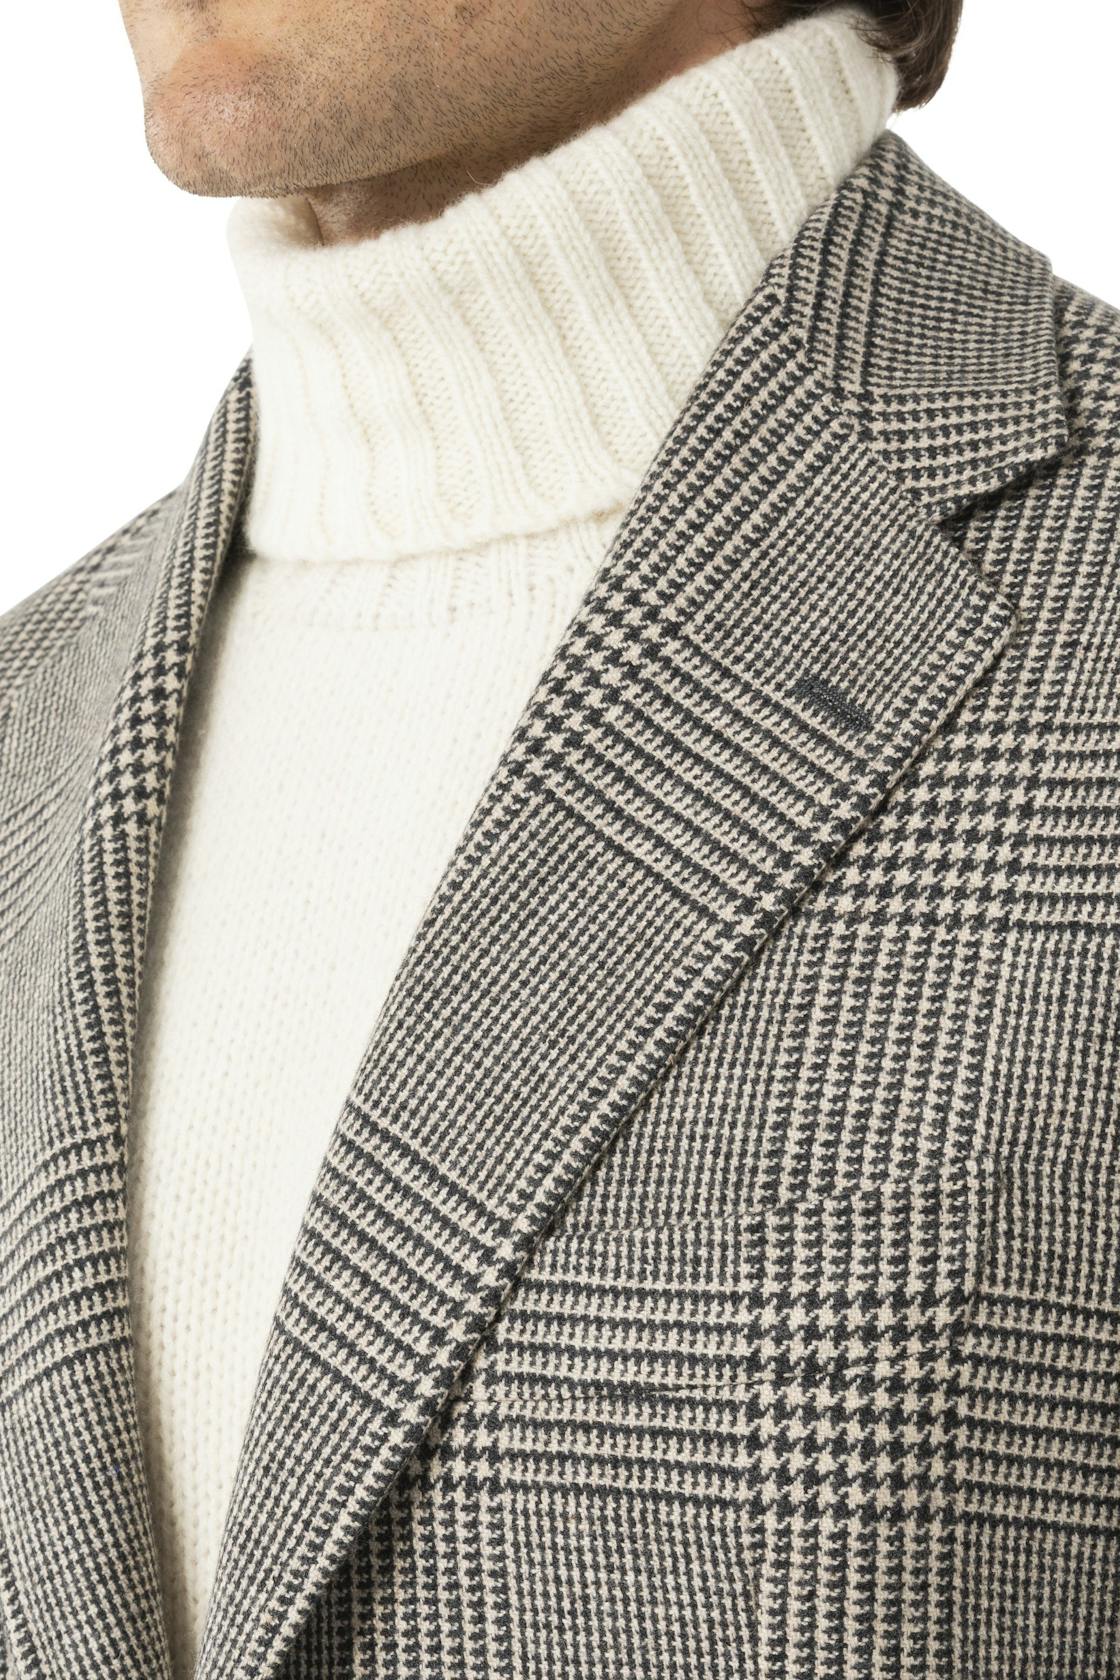 The Armoury by Ring Jacket Model 3 Cashmere Cream Charcoal Prince of Wales Check Sport Coat